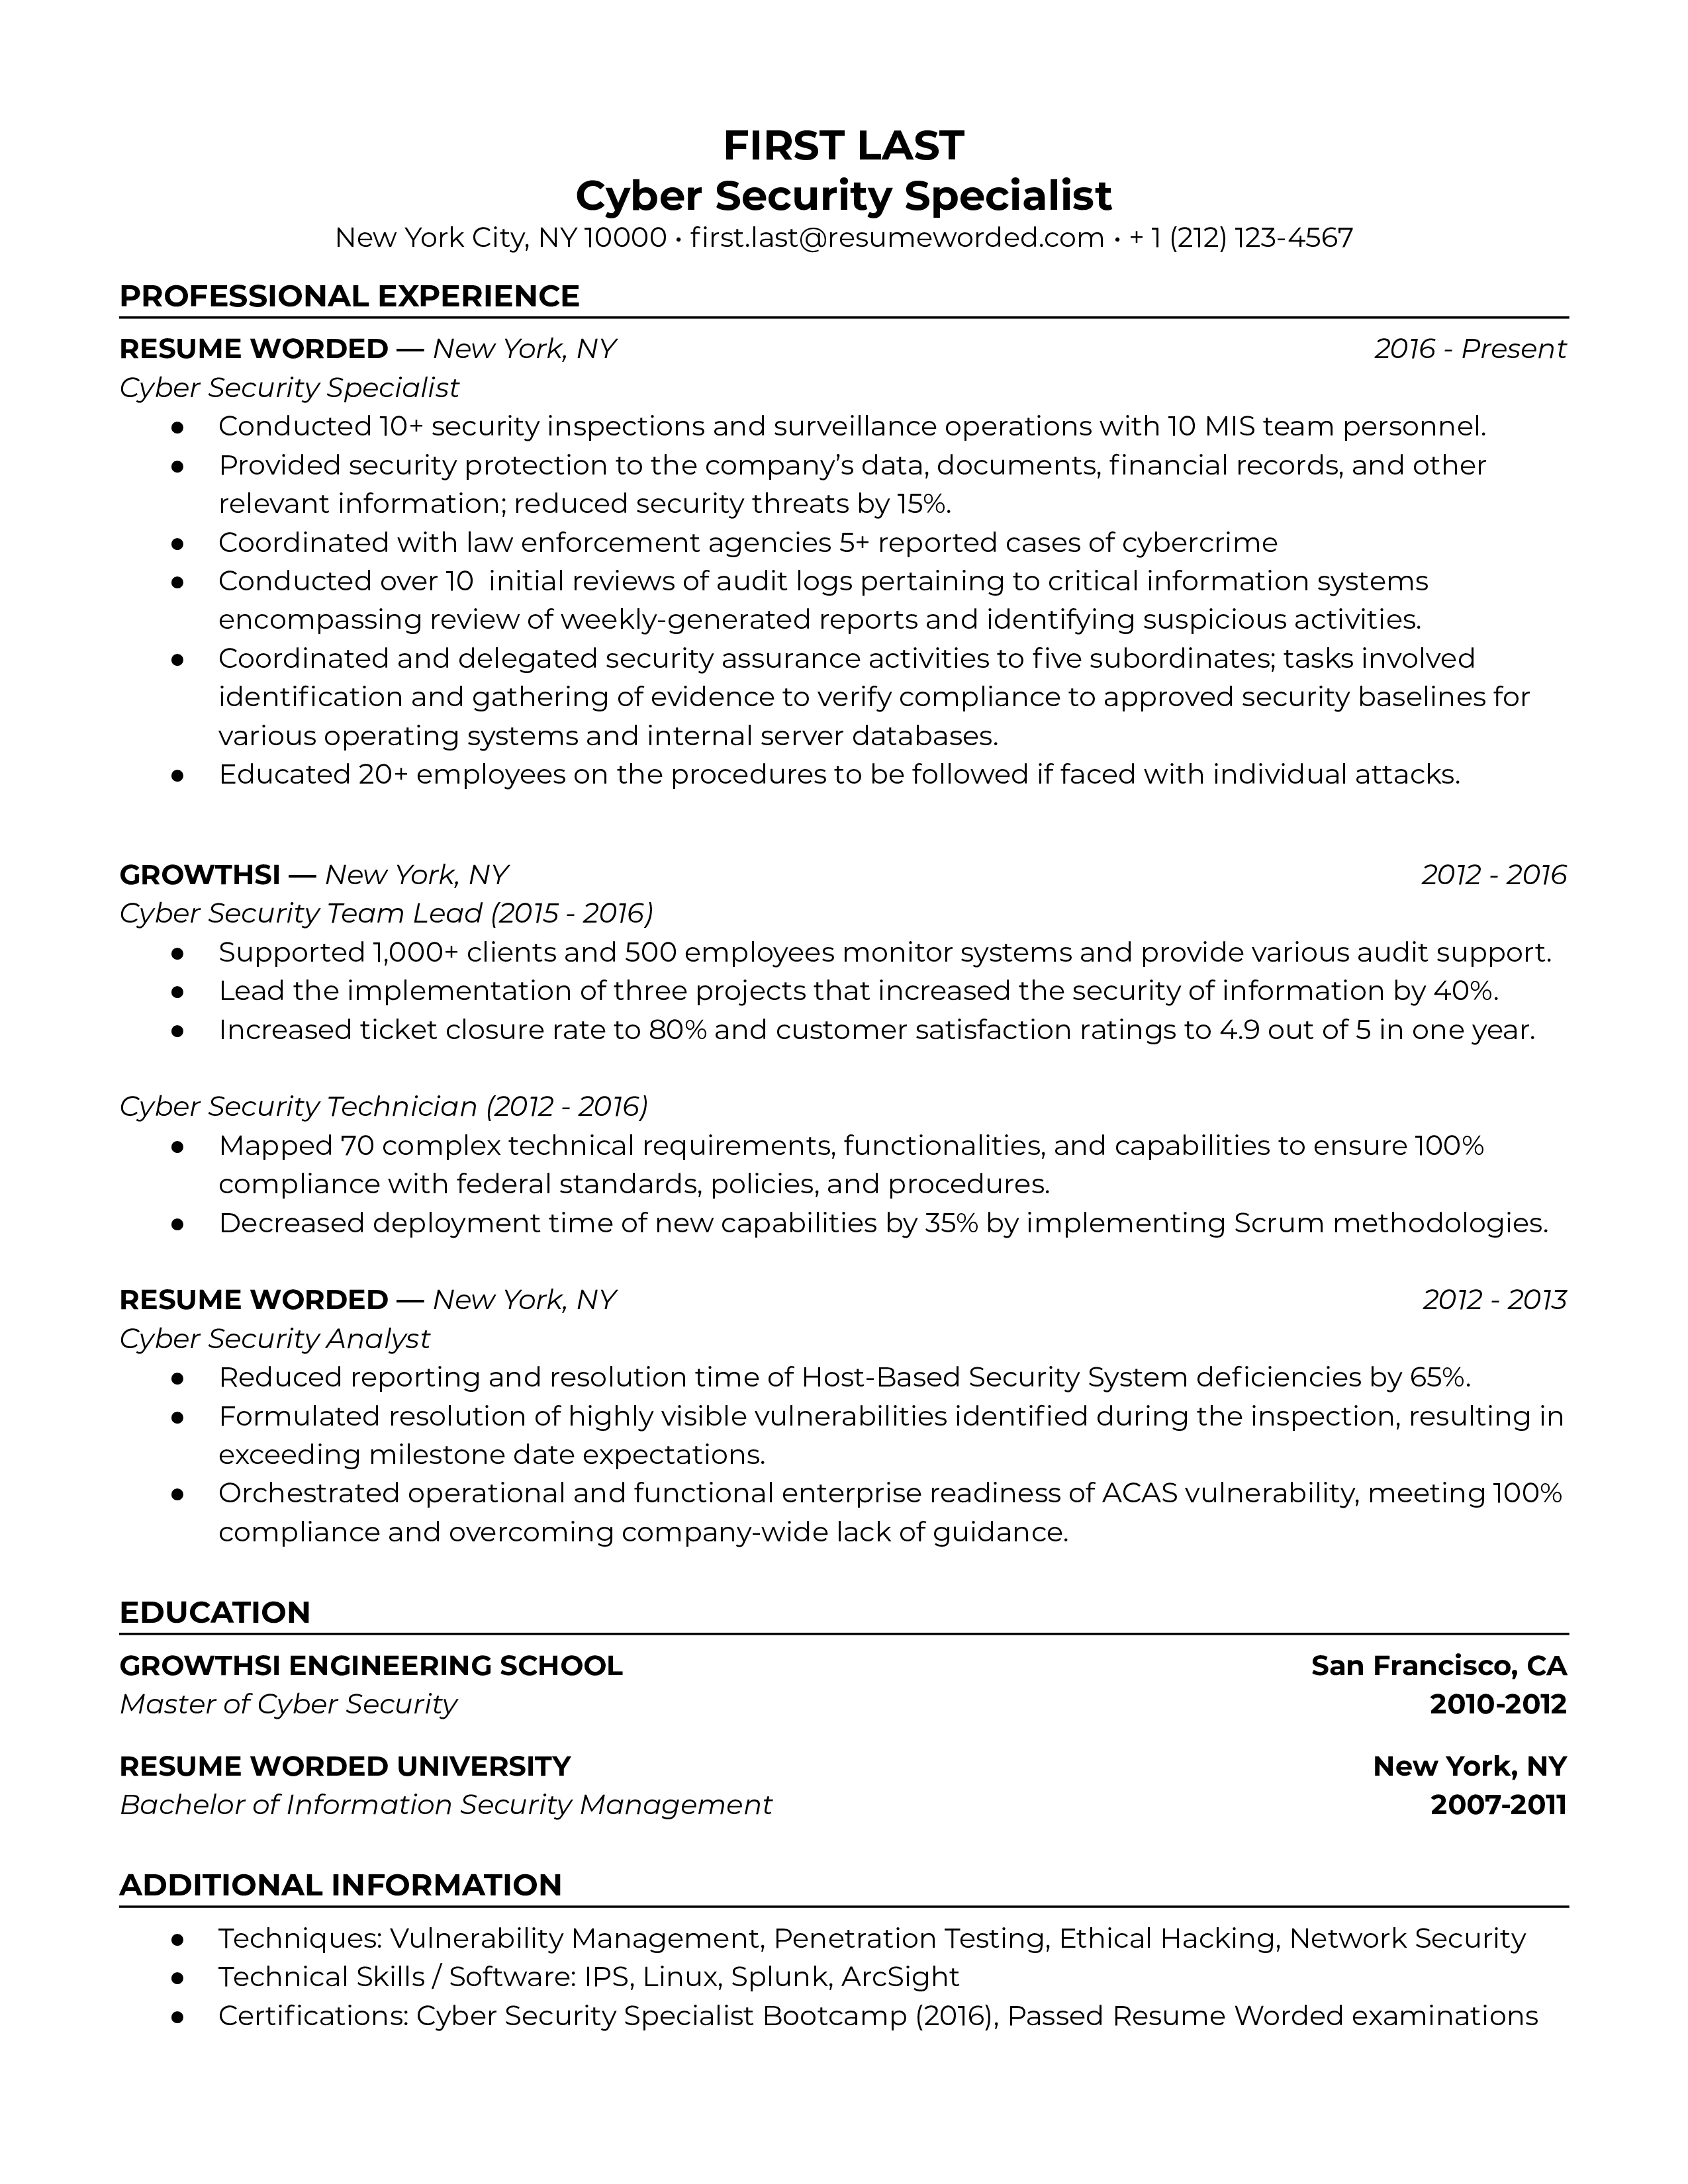 A CV screenshot depicting the certifications and experience of a Cyber Security Specialist.